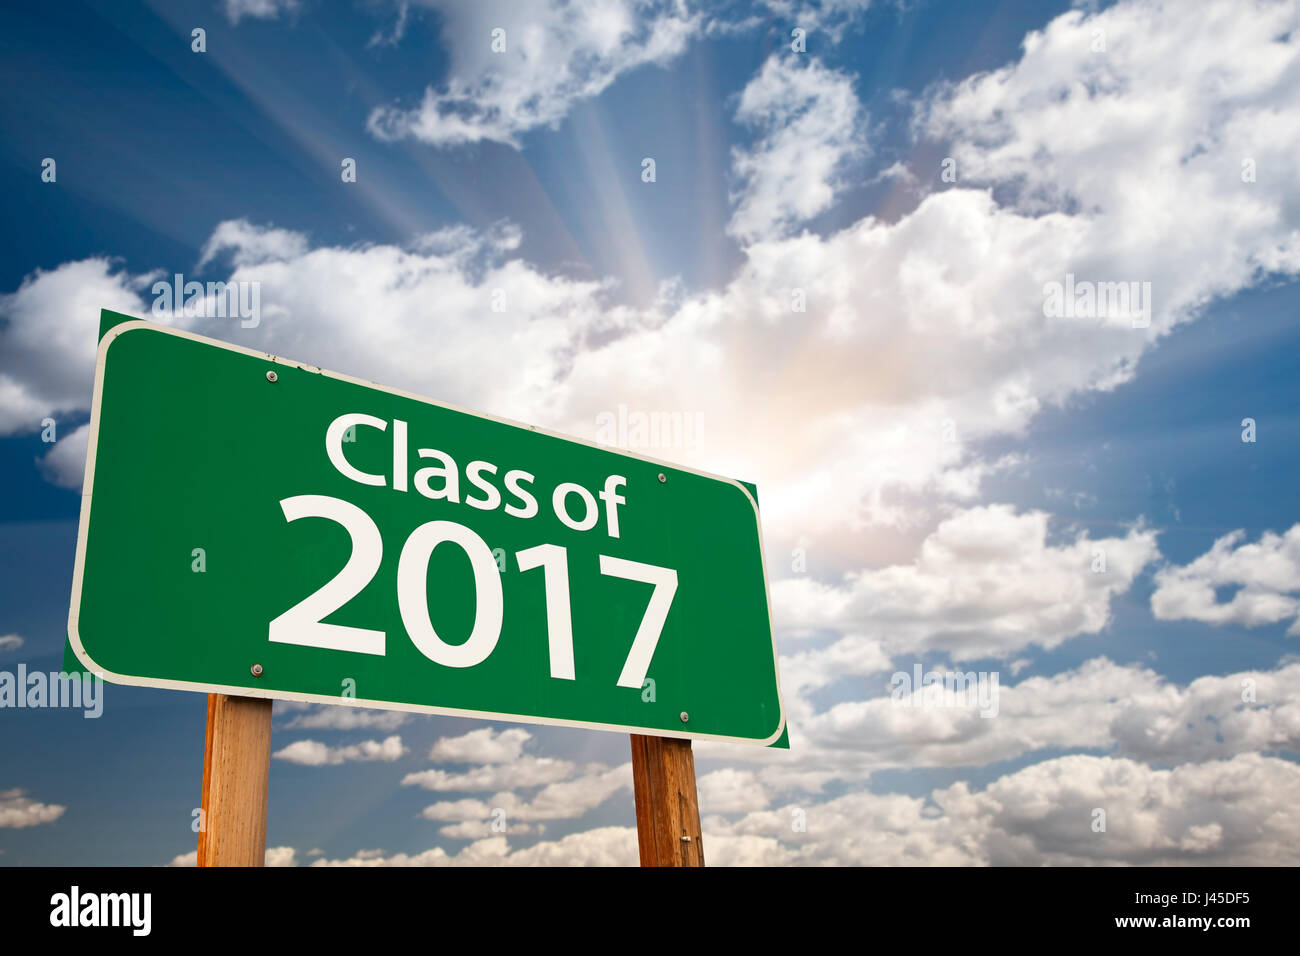 Class of 2017 Green Road Sign with Dramatic Clouds and Sky. Stock Photo